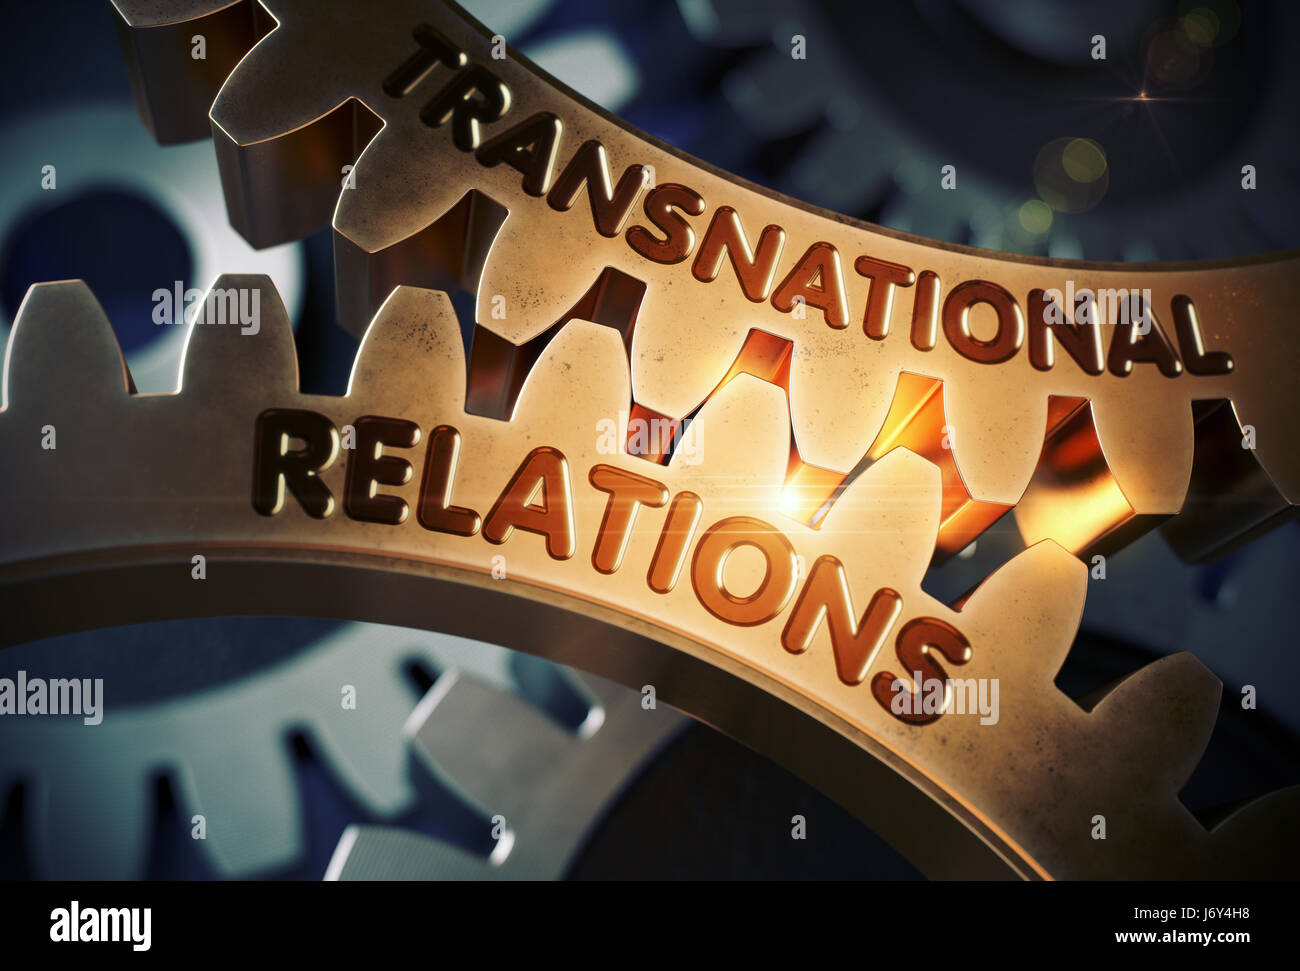 Transnational Relations. 3D. Stock Photo